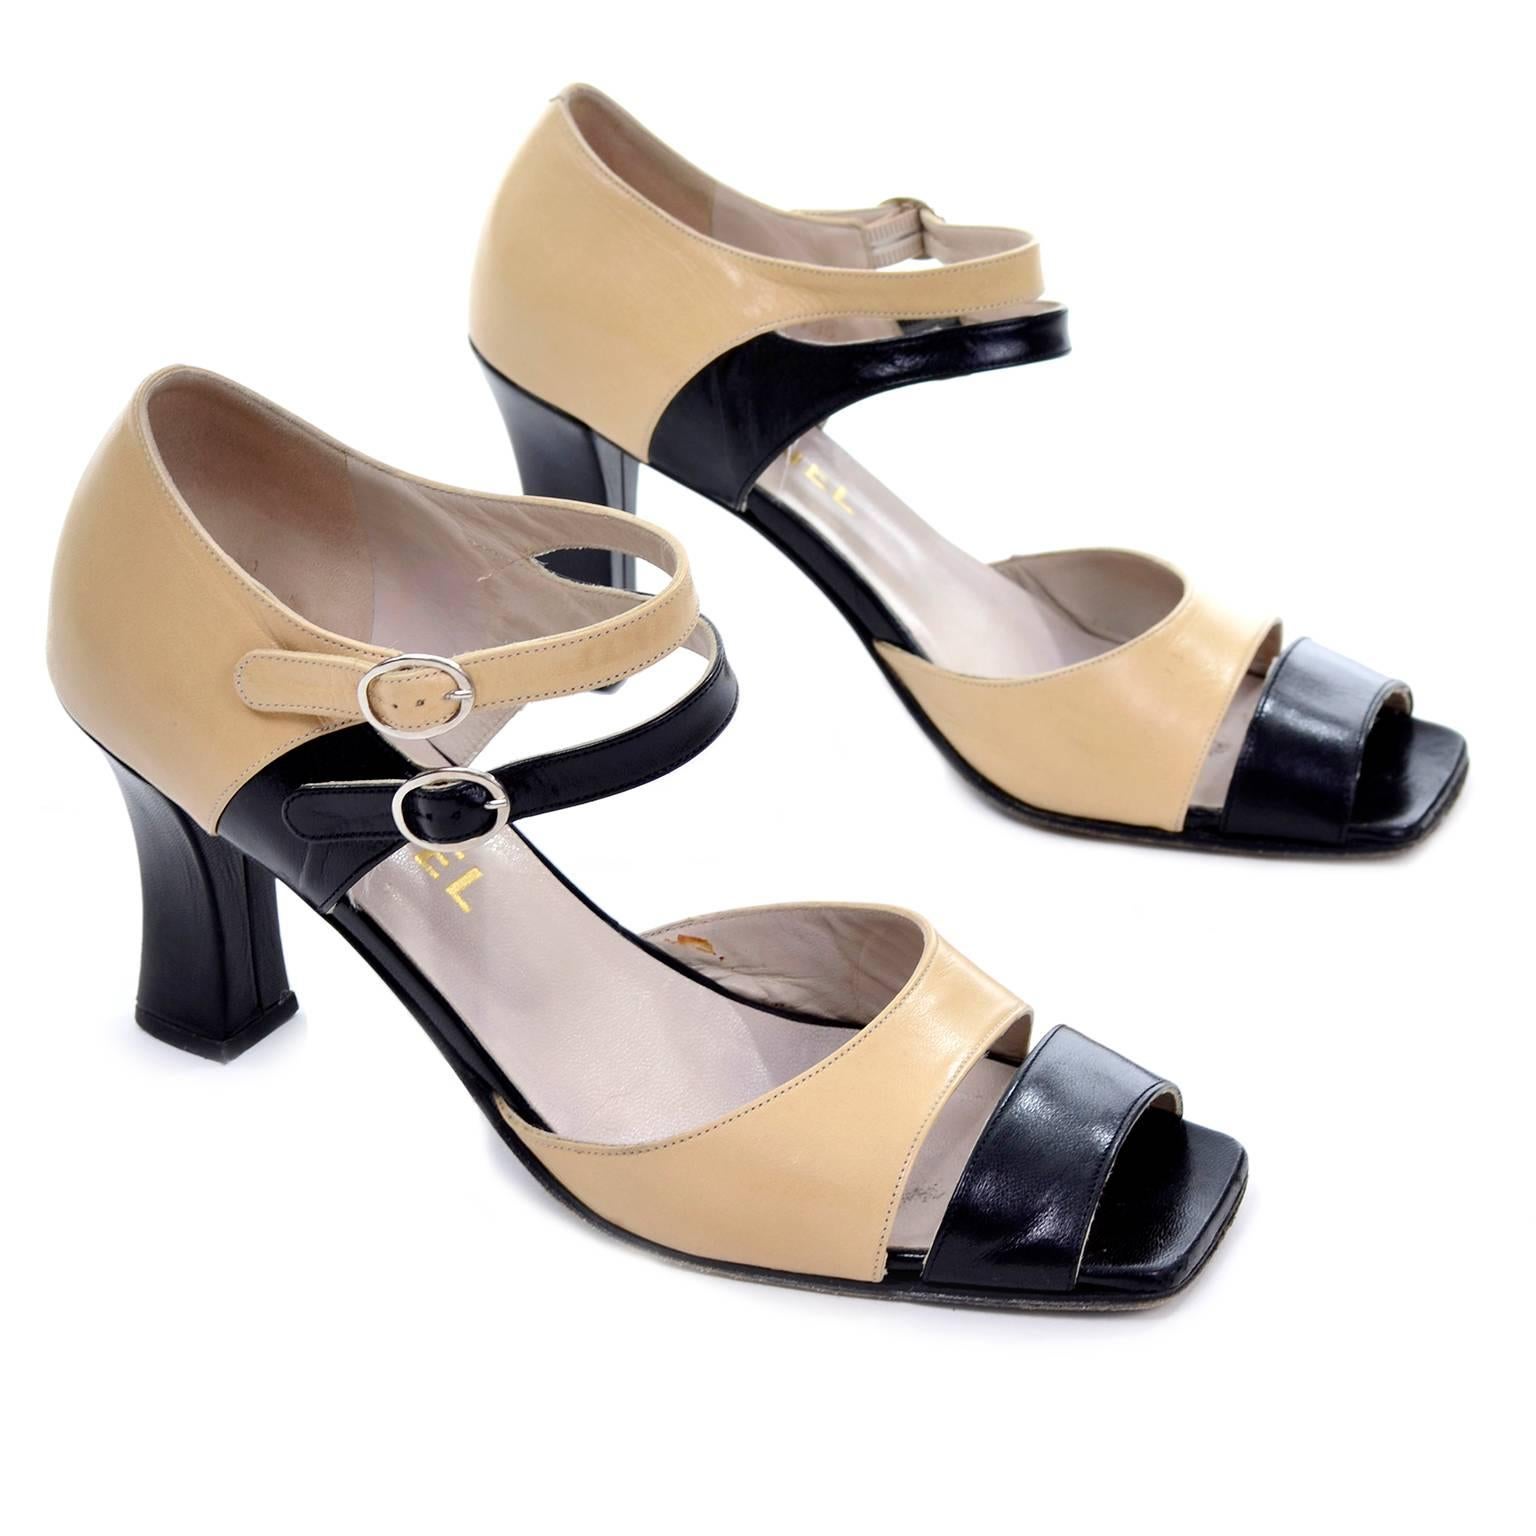 Chanel Vintage Peep Toe Double Strap Two Tone Beige and Black Shoes 37.5 1